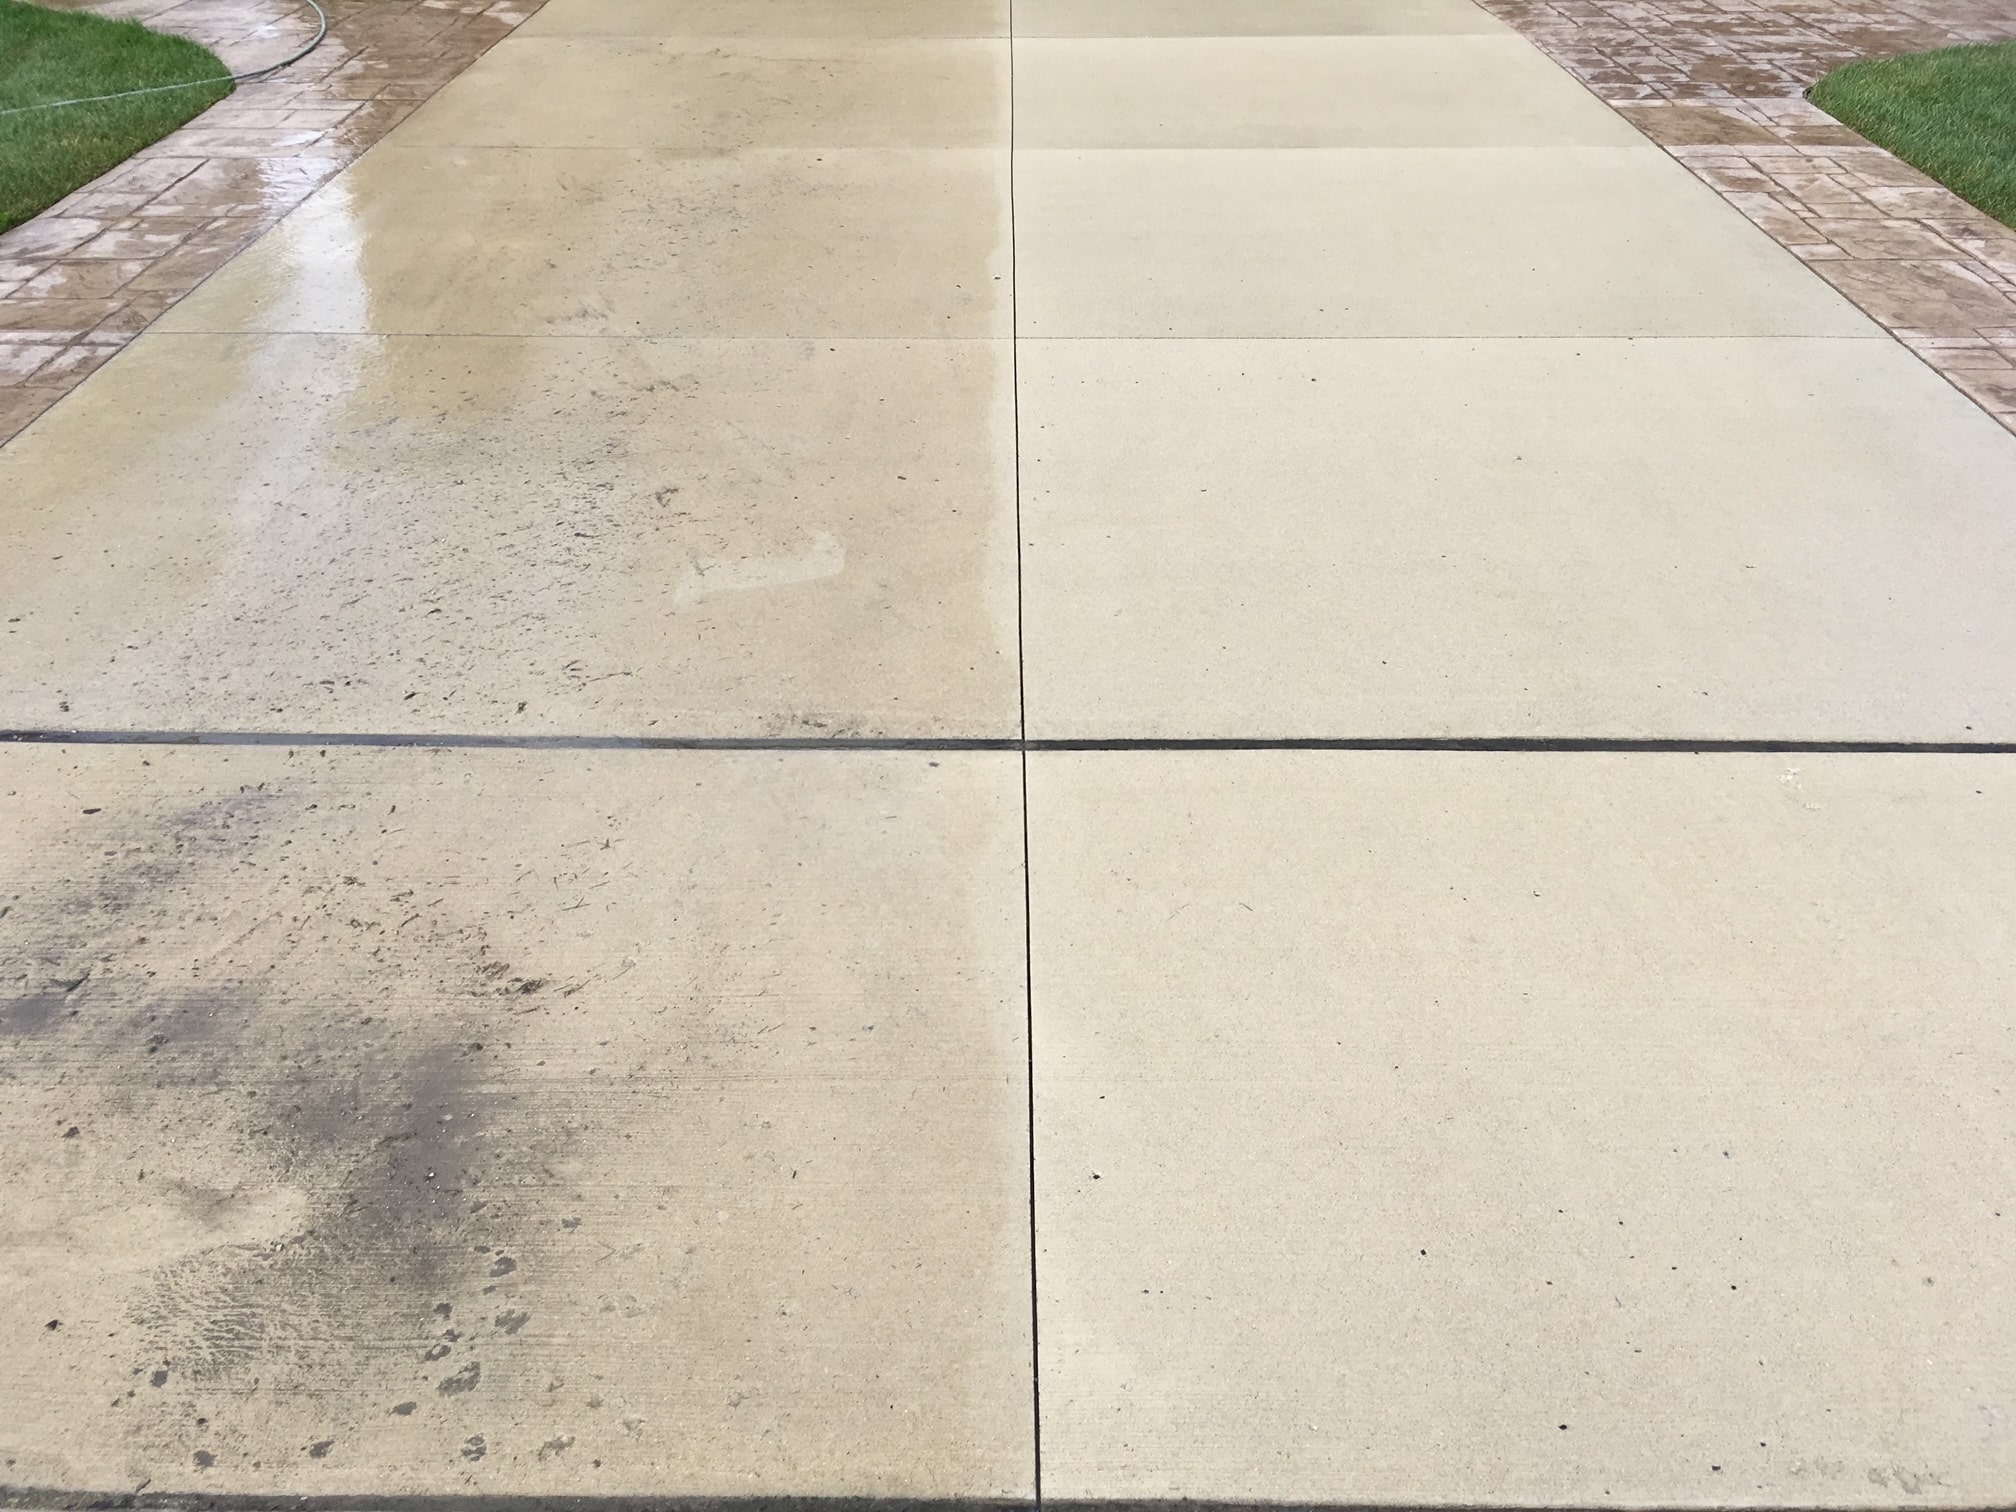 driveway cleaning in Macomb township